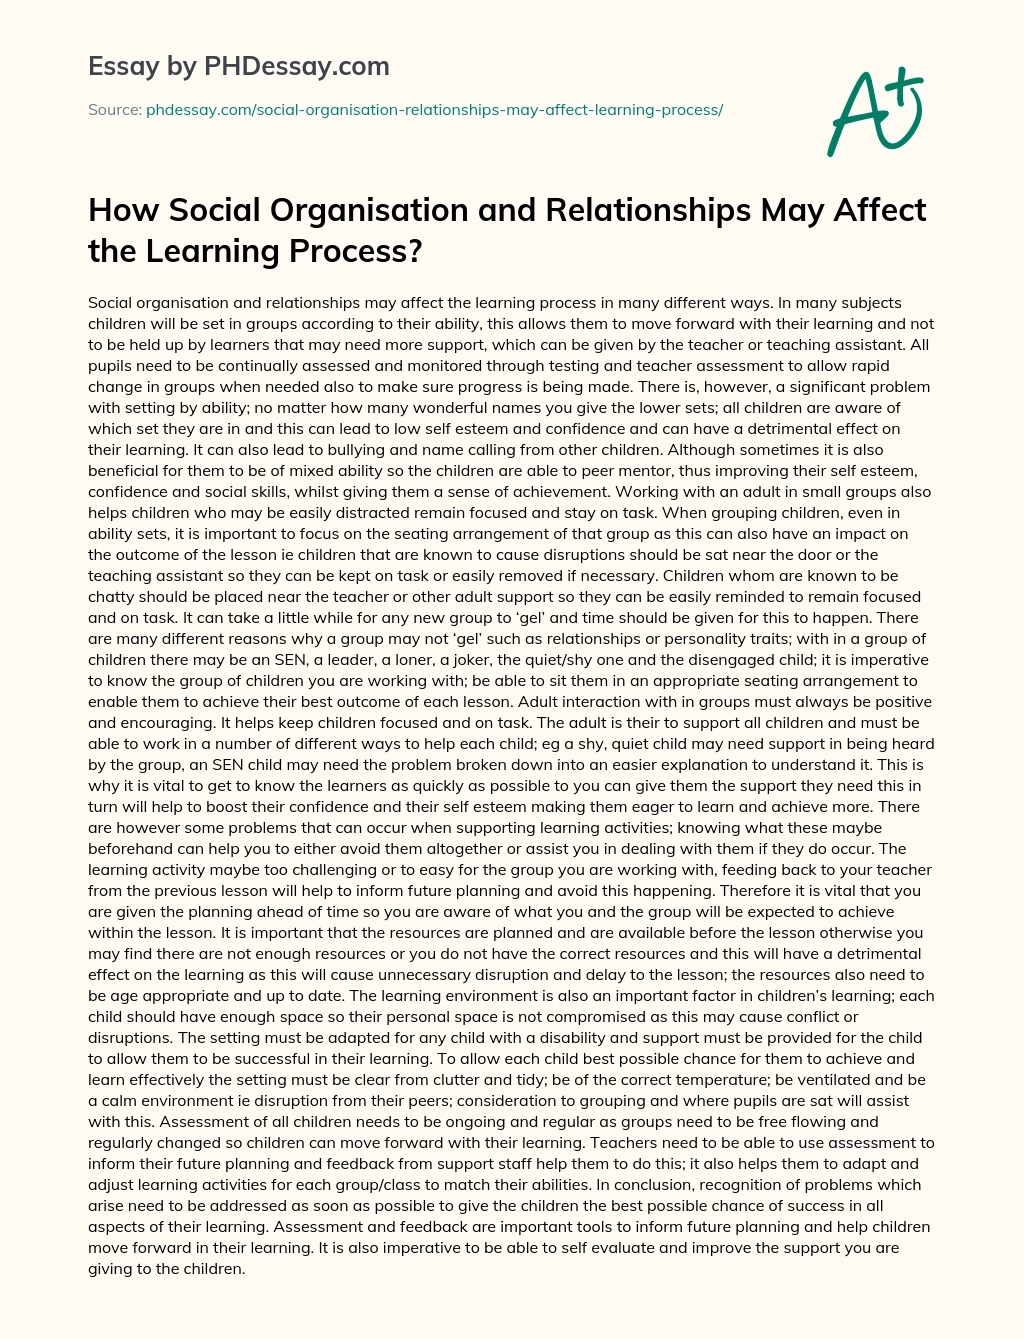 How Social Organisation and Relationships May Affect the Learning Process? essay